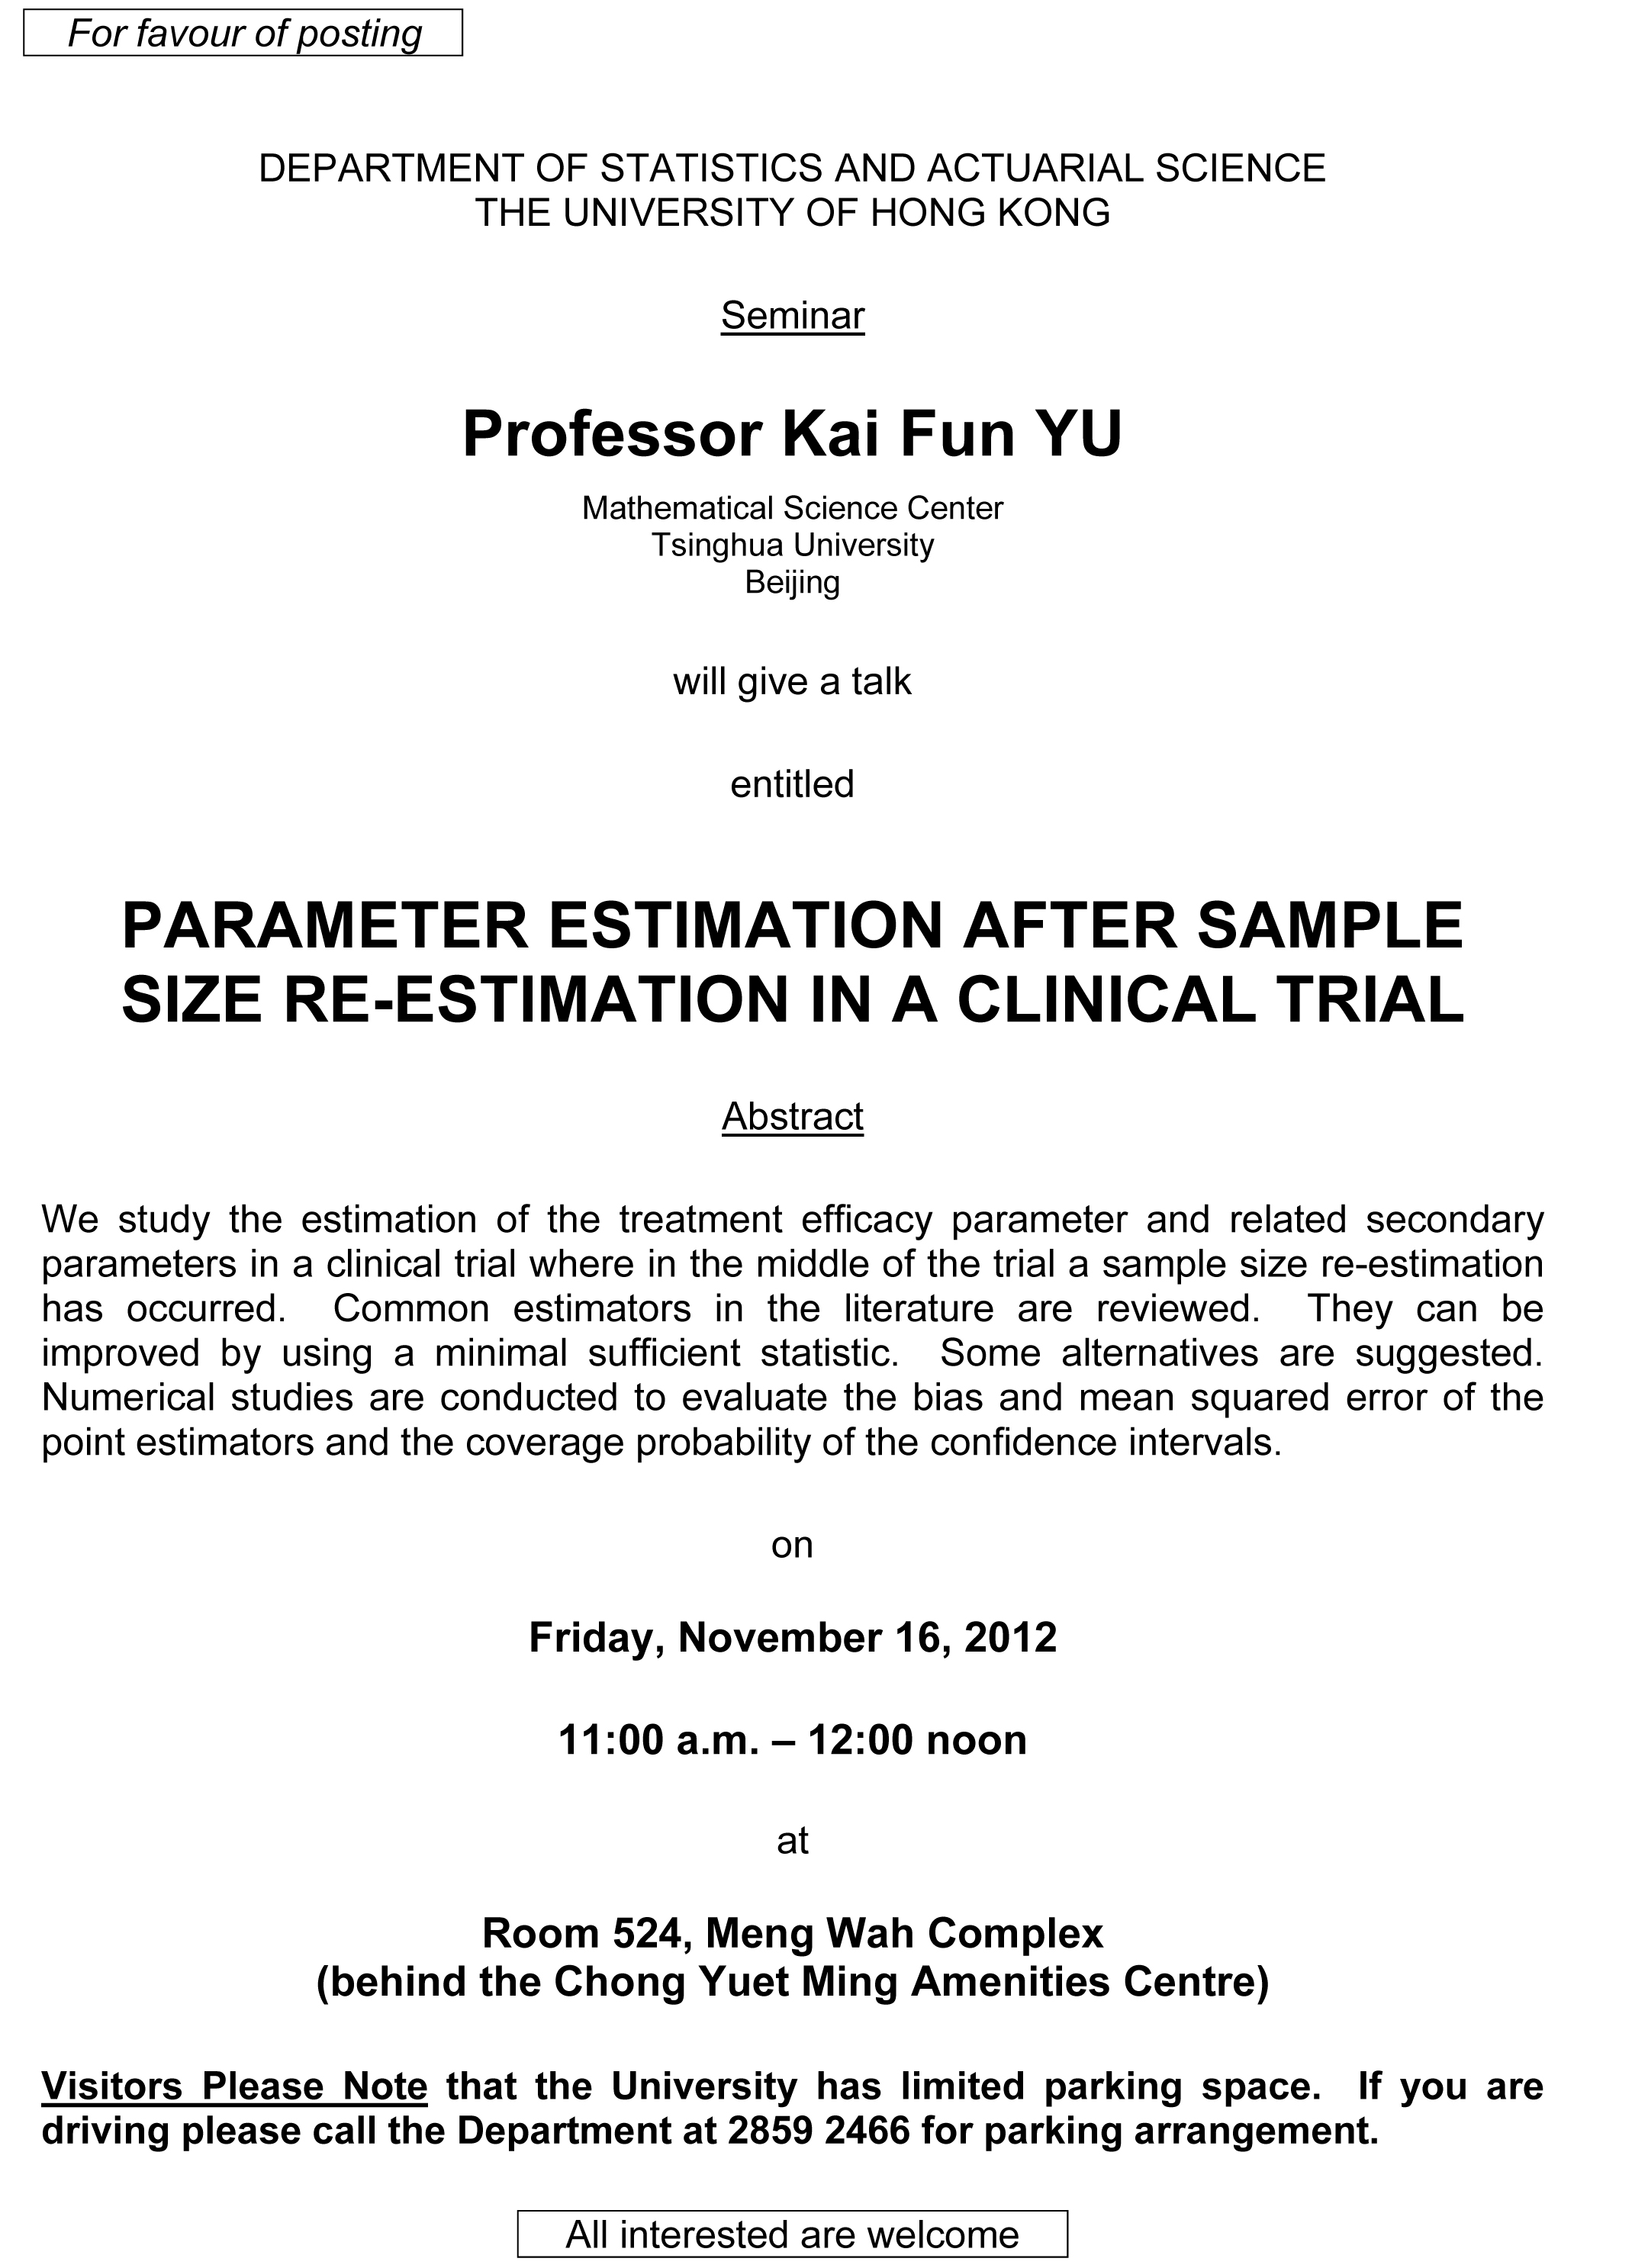 Seminar on 'Parameter estimation after sample size re-estimation in a clinical trial' by by Professor Kai Fun YU on November 16, 2012